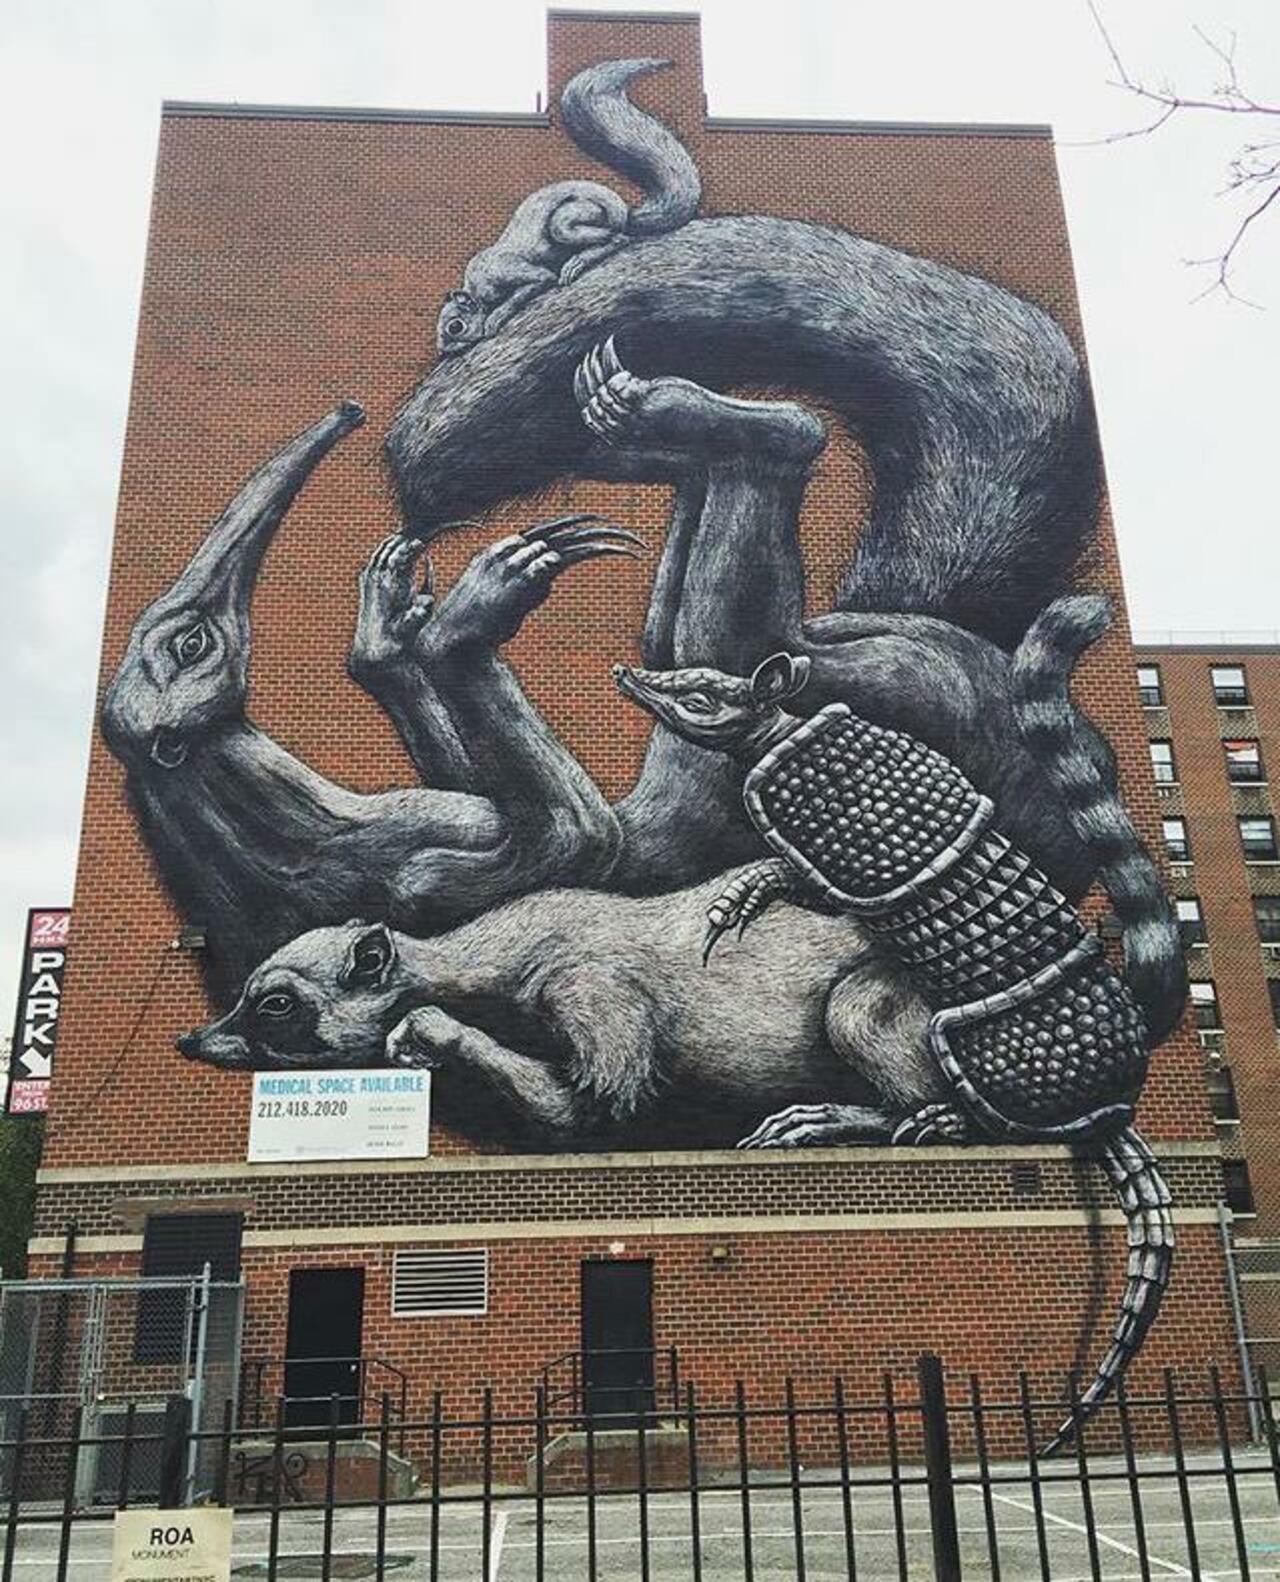 The completed new large scale Street Art wall by ROA in NYC

#art #graffiti #mural #streetart http://t.co/XjcPUJEz67